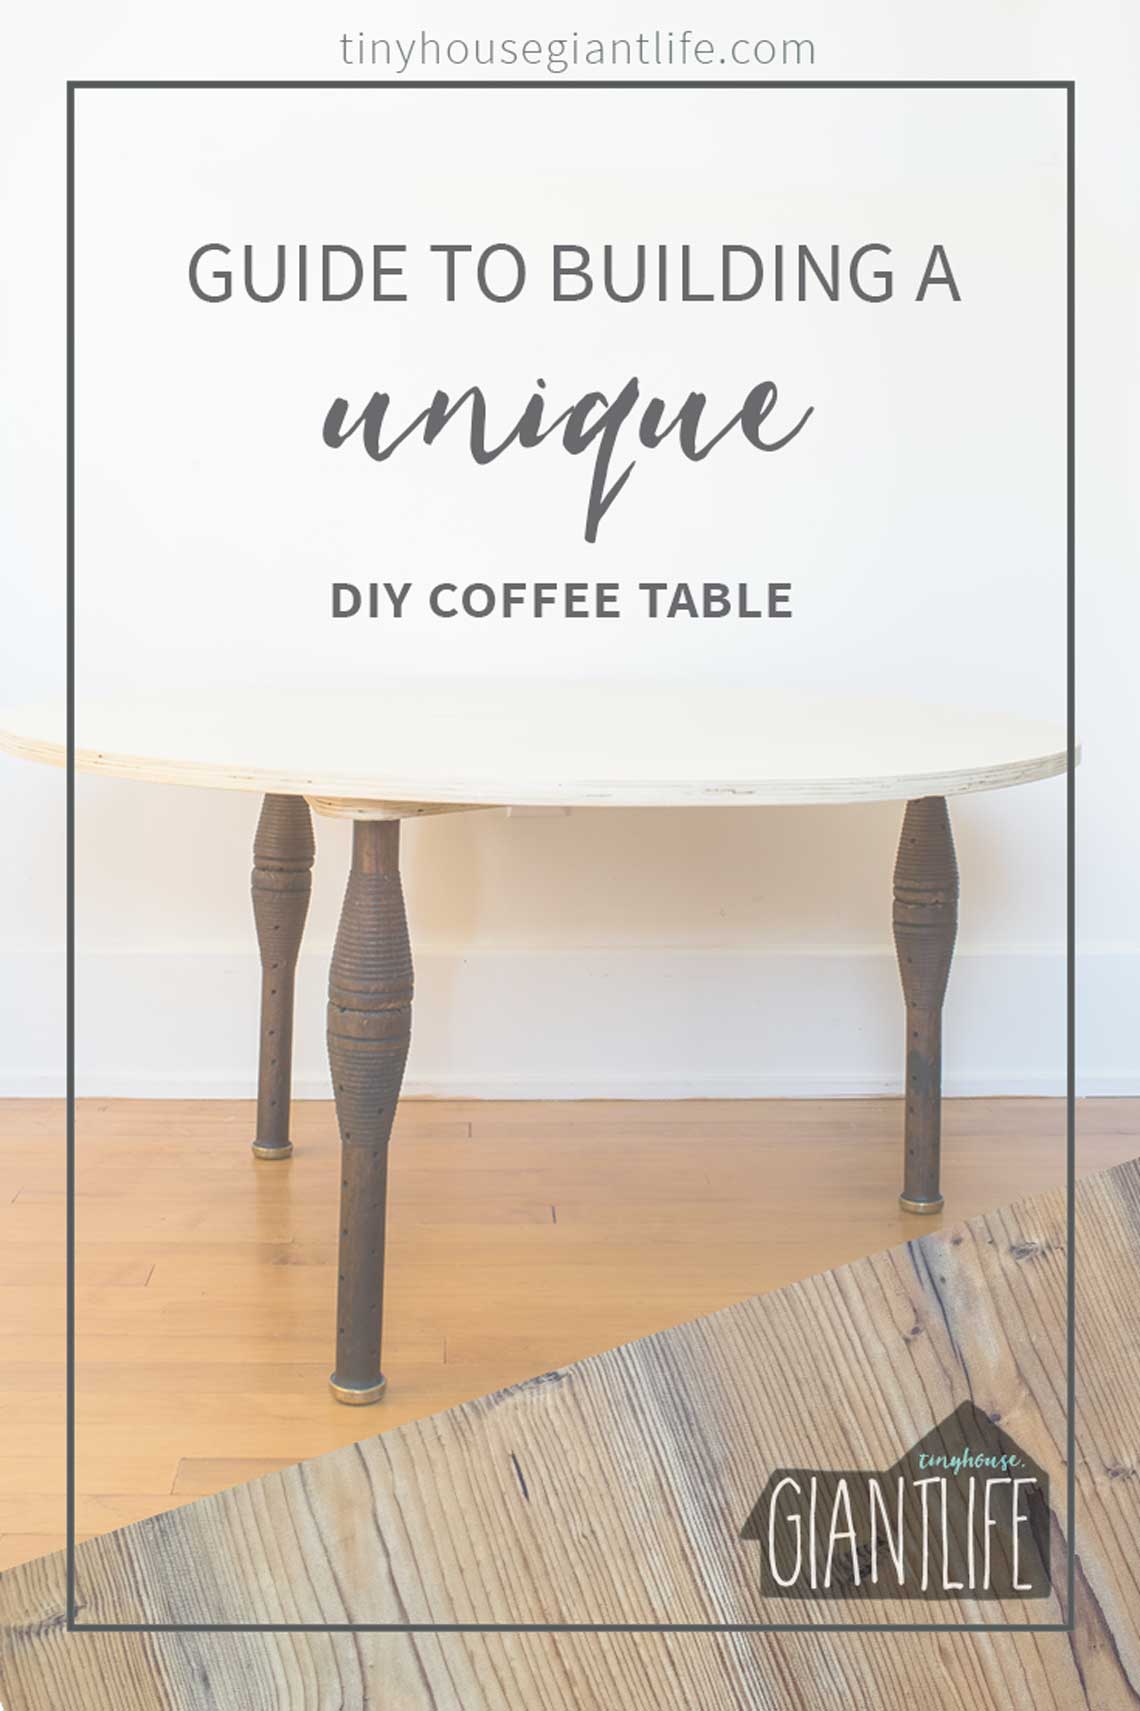 A Guide To Building A Unique DIY Coffee Table (Using IVinatge Industrial Spool's & A Plywood Top)